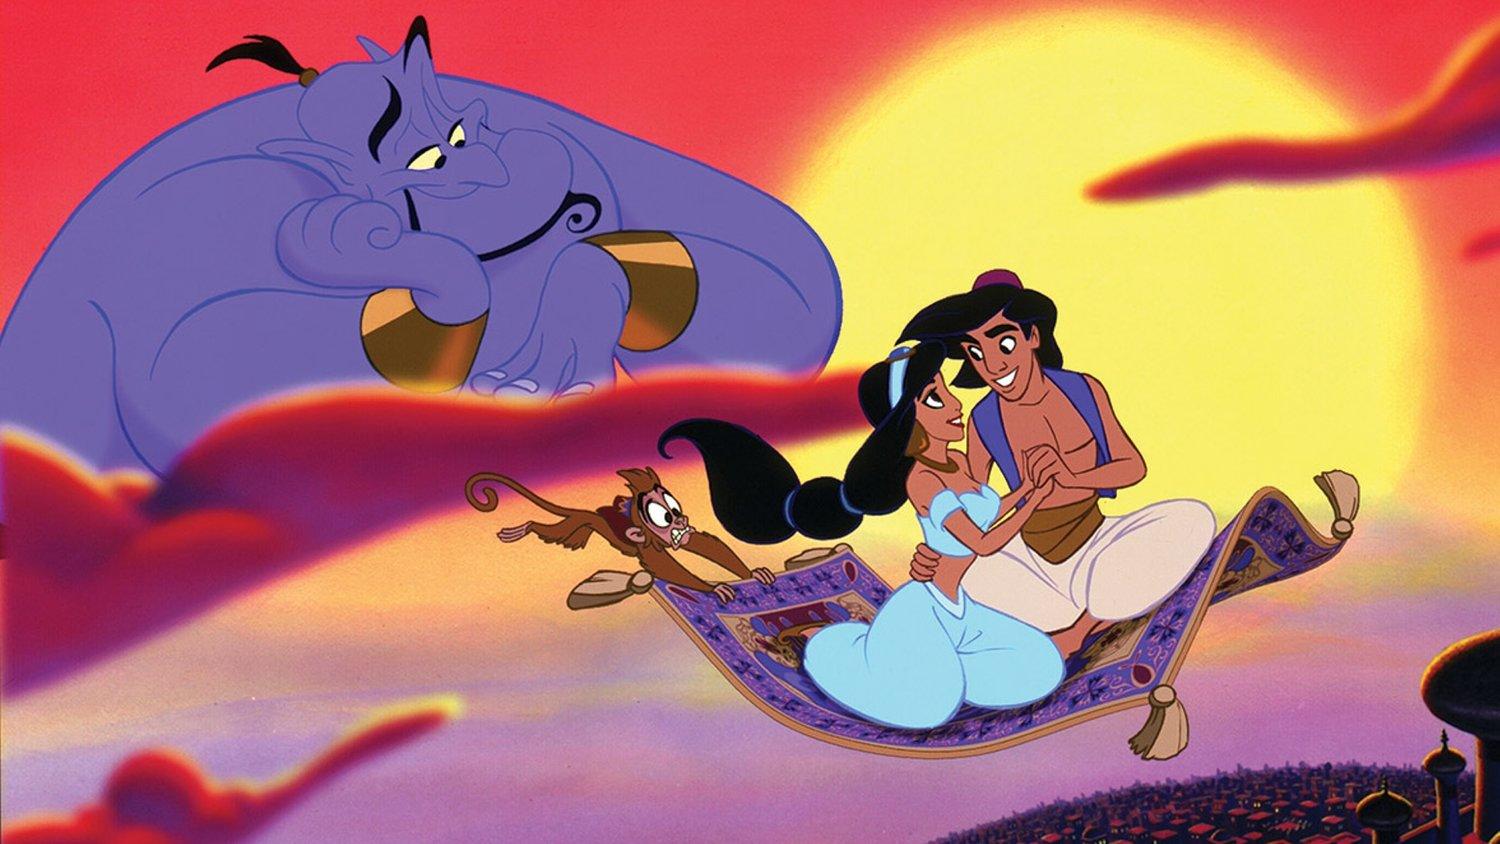 Disney Showed Off Some Footage Of Guy Ritchie's Live Action ALADDIN